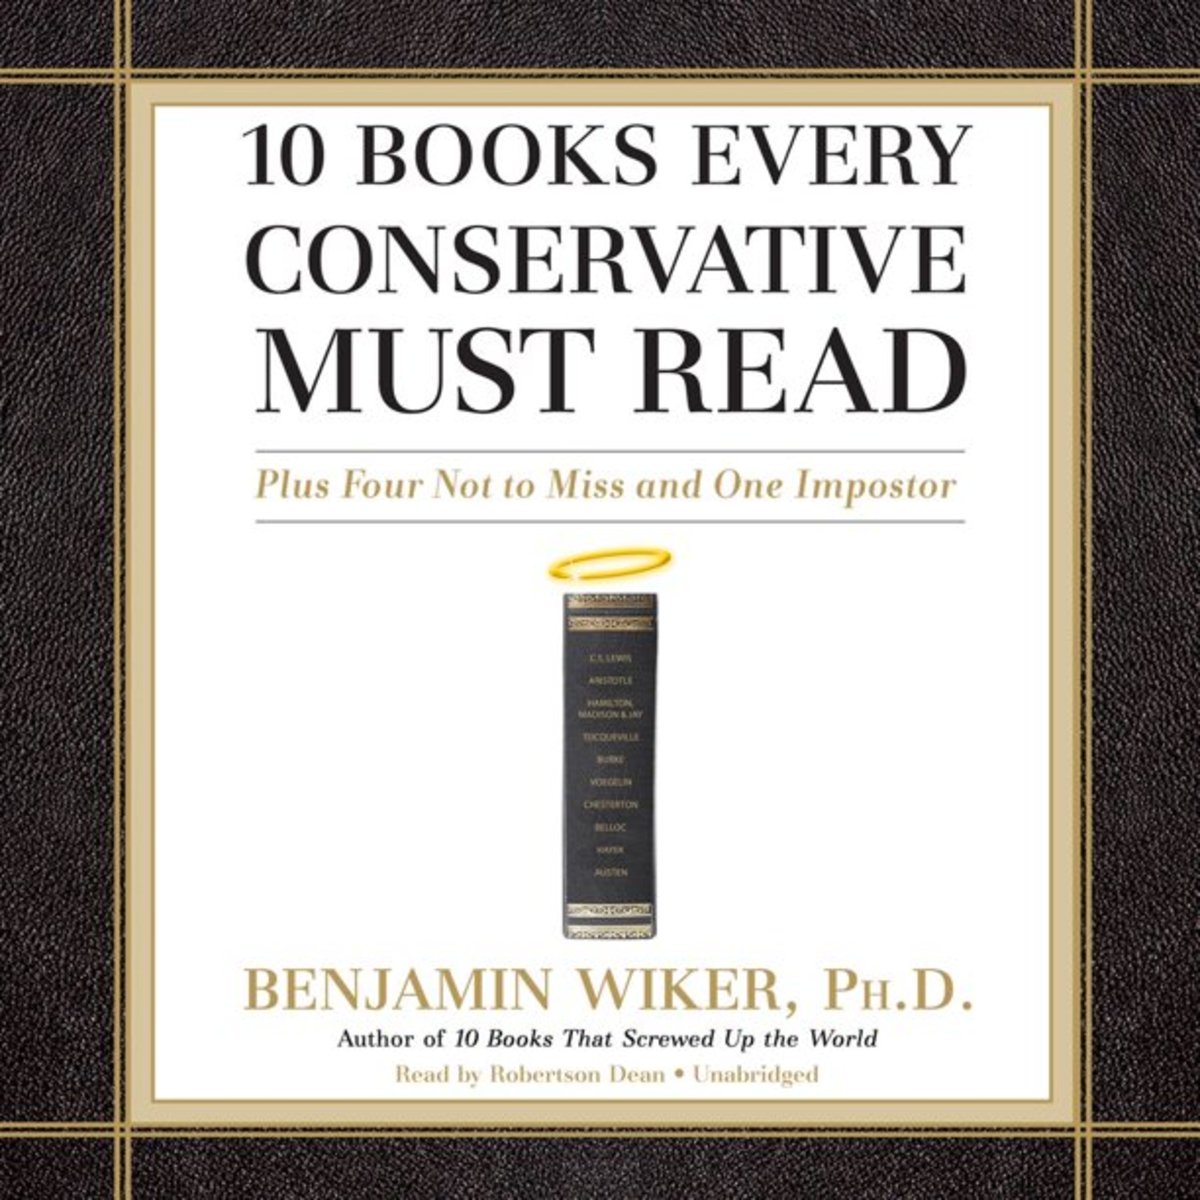 10 Books Every Conservative Must Read by Benjamin Wiker: A Synopsis